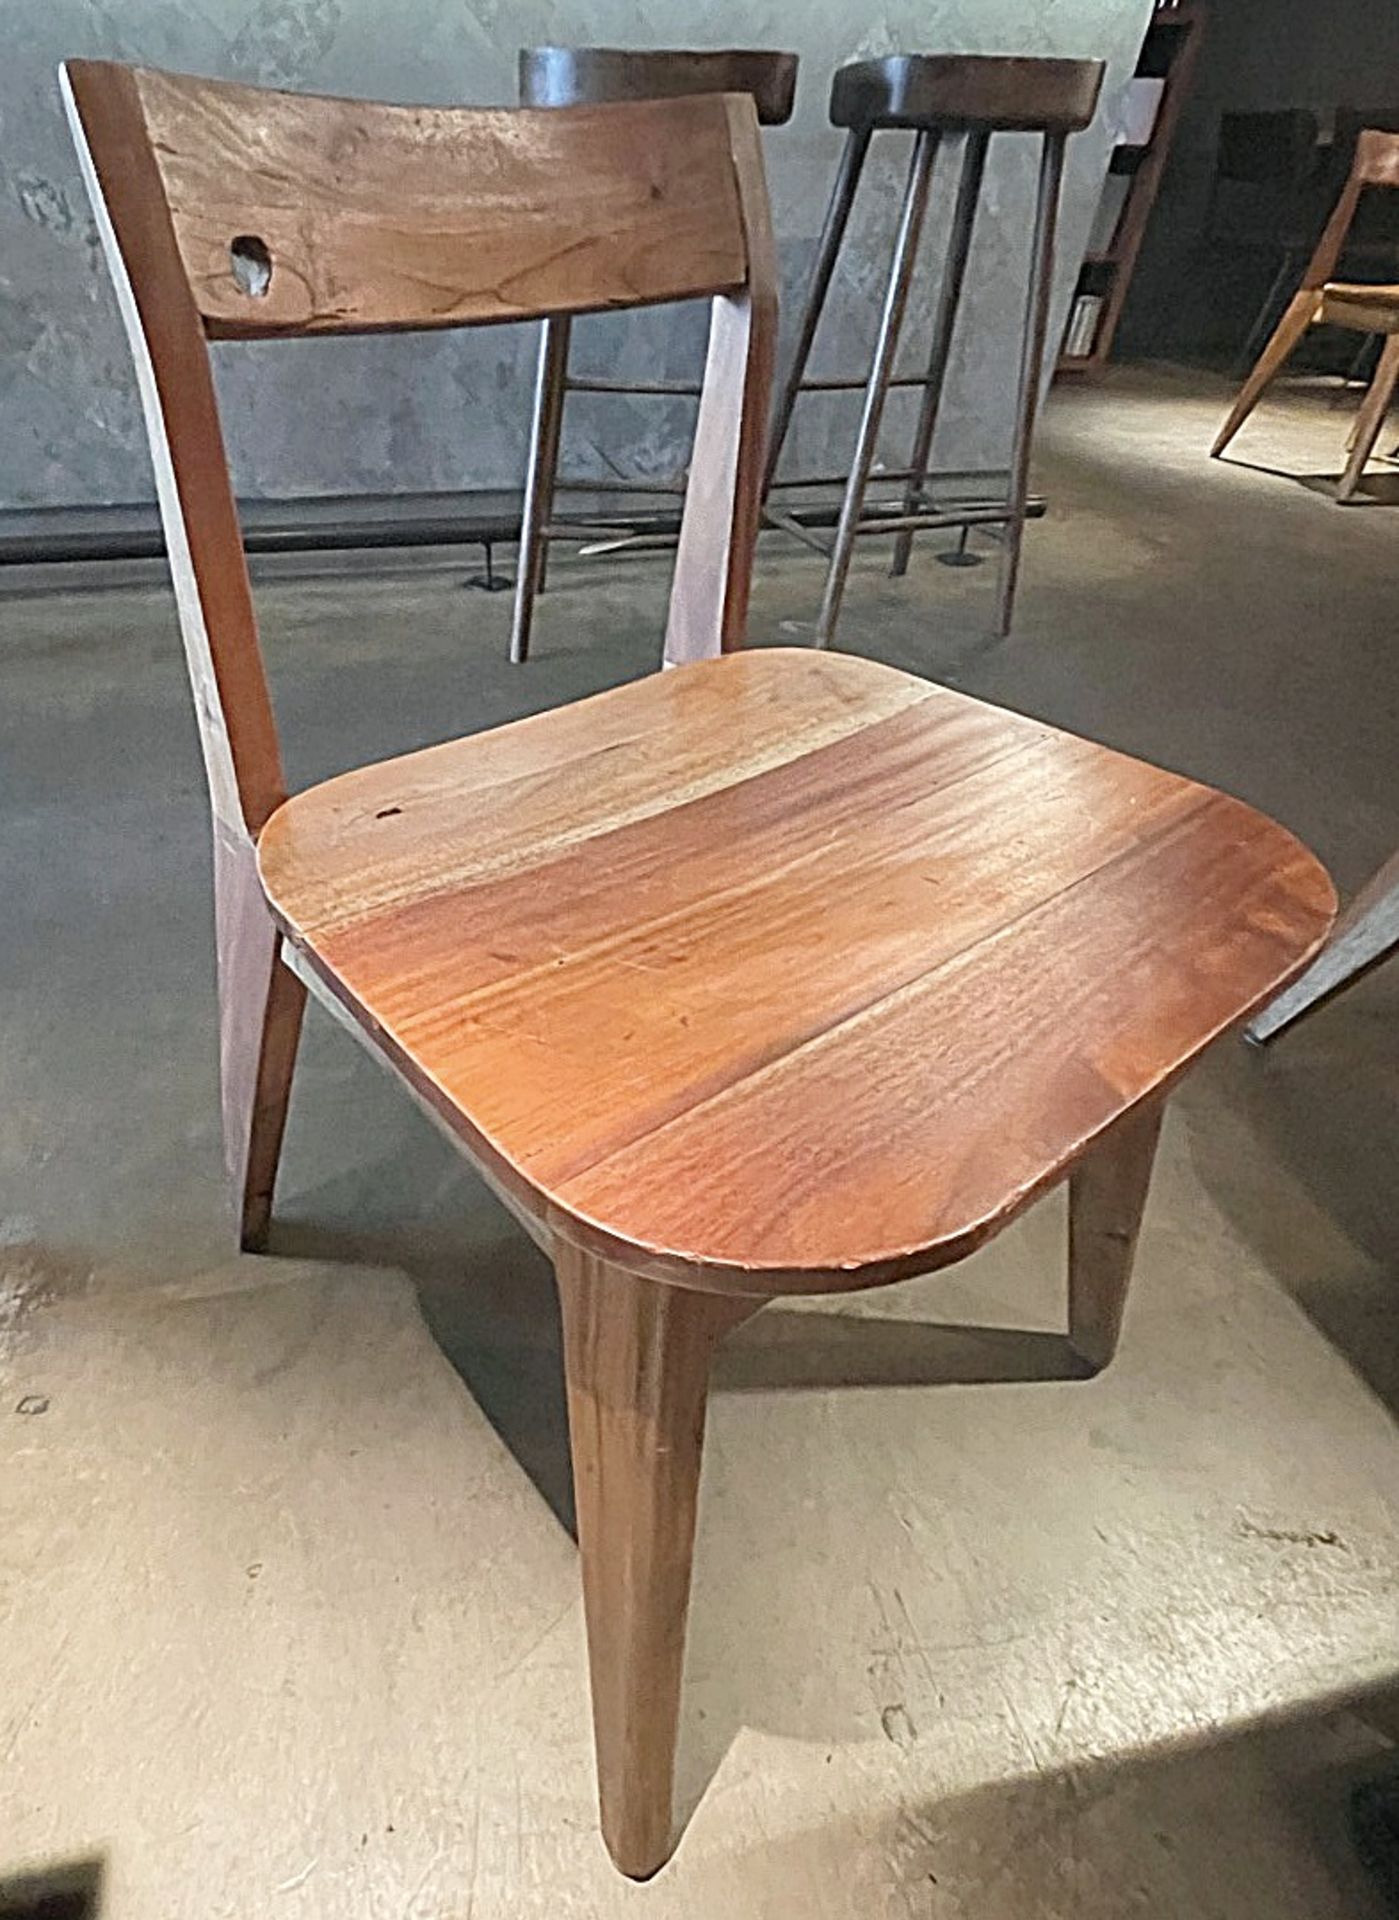 12 x Solid Wood Bistro Dining Chairs - Ref: MAN141 - CL677 - Location: London W1FThis item is to - Image 3 of 12